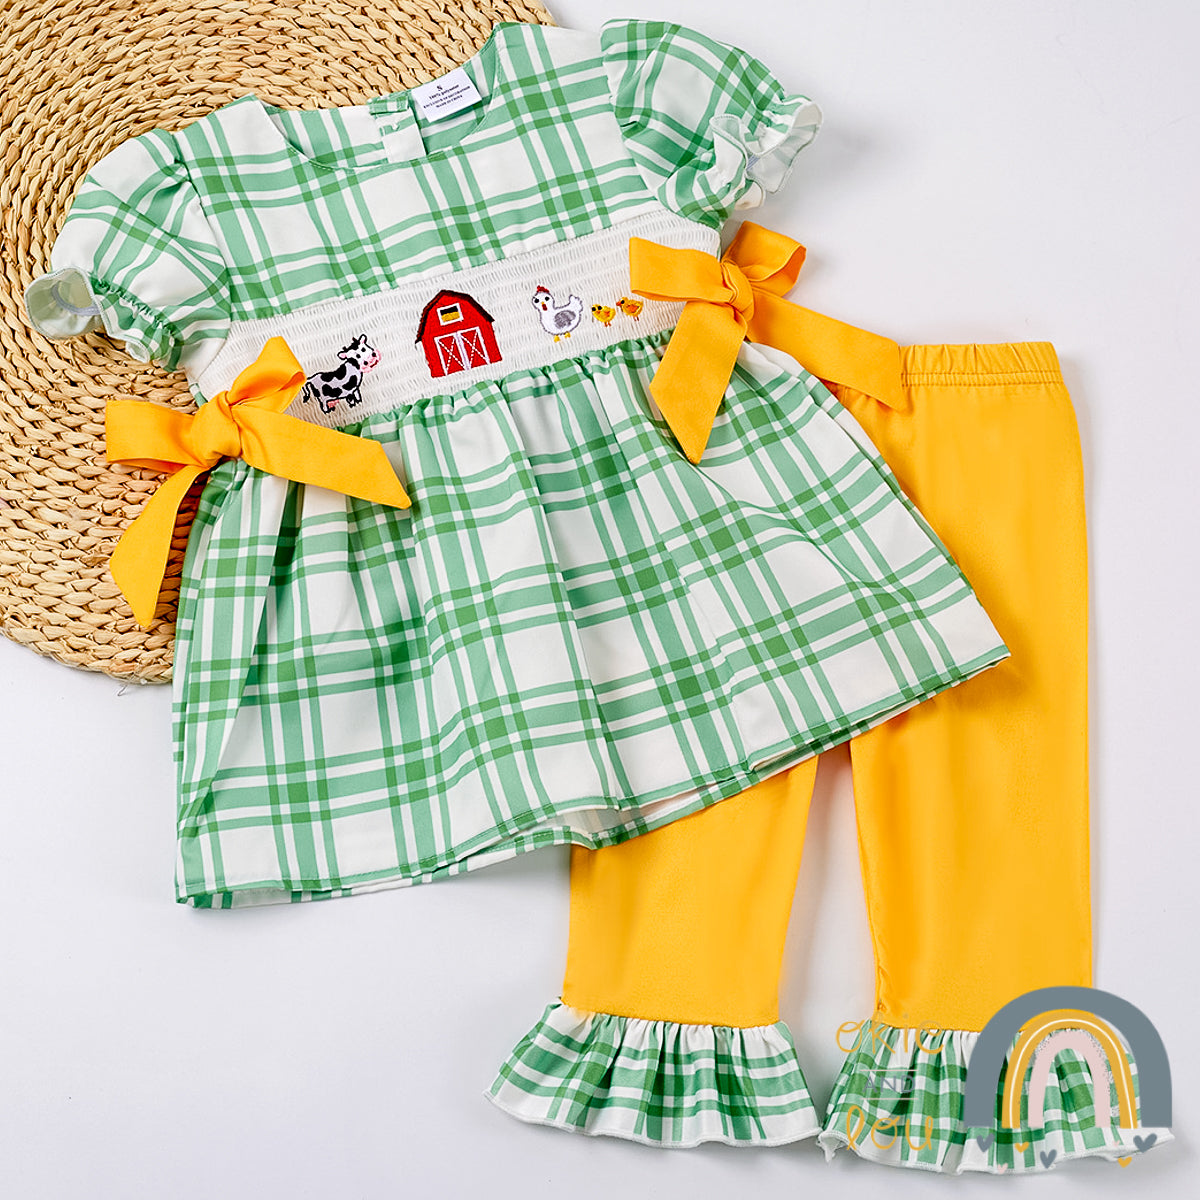 Barnyard Friends - Outfit